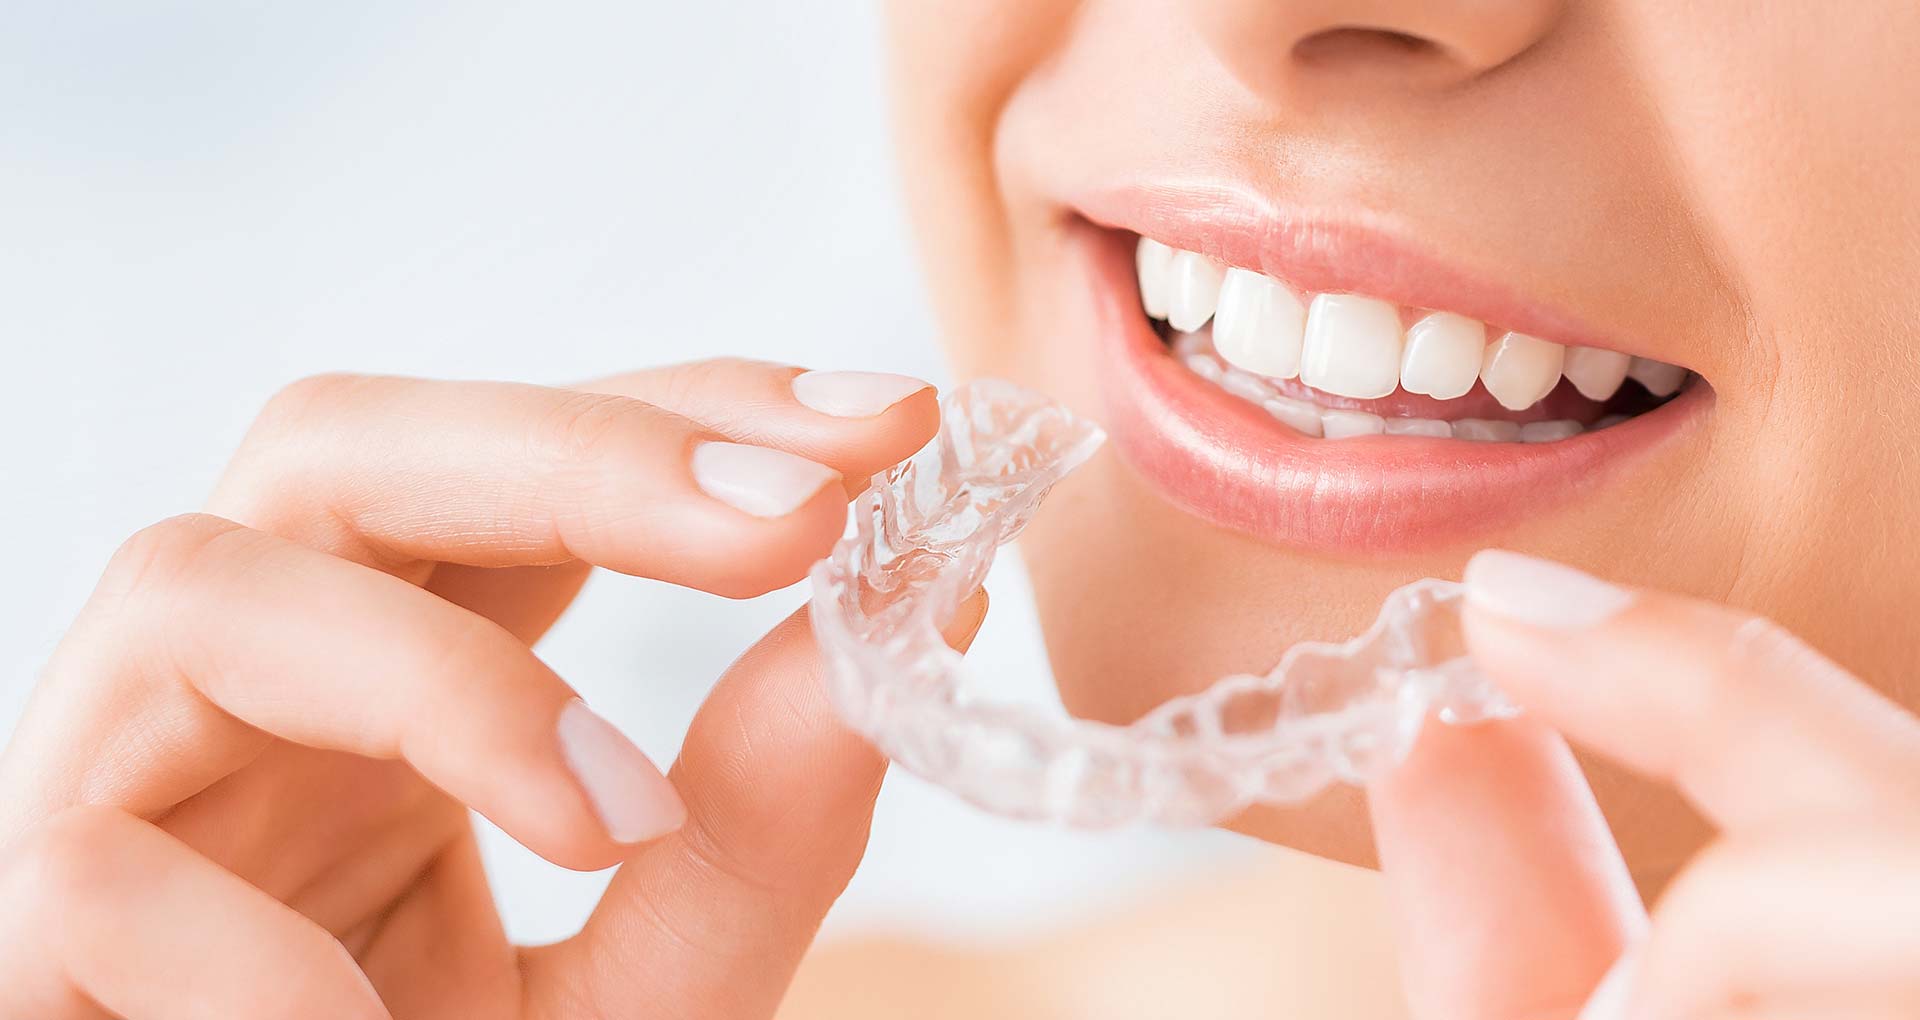 Where To Find the Best Affordable Dentist for Invisalign Treatment?